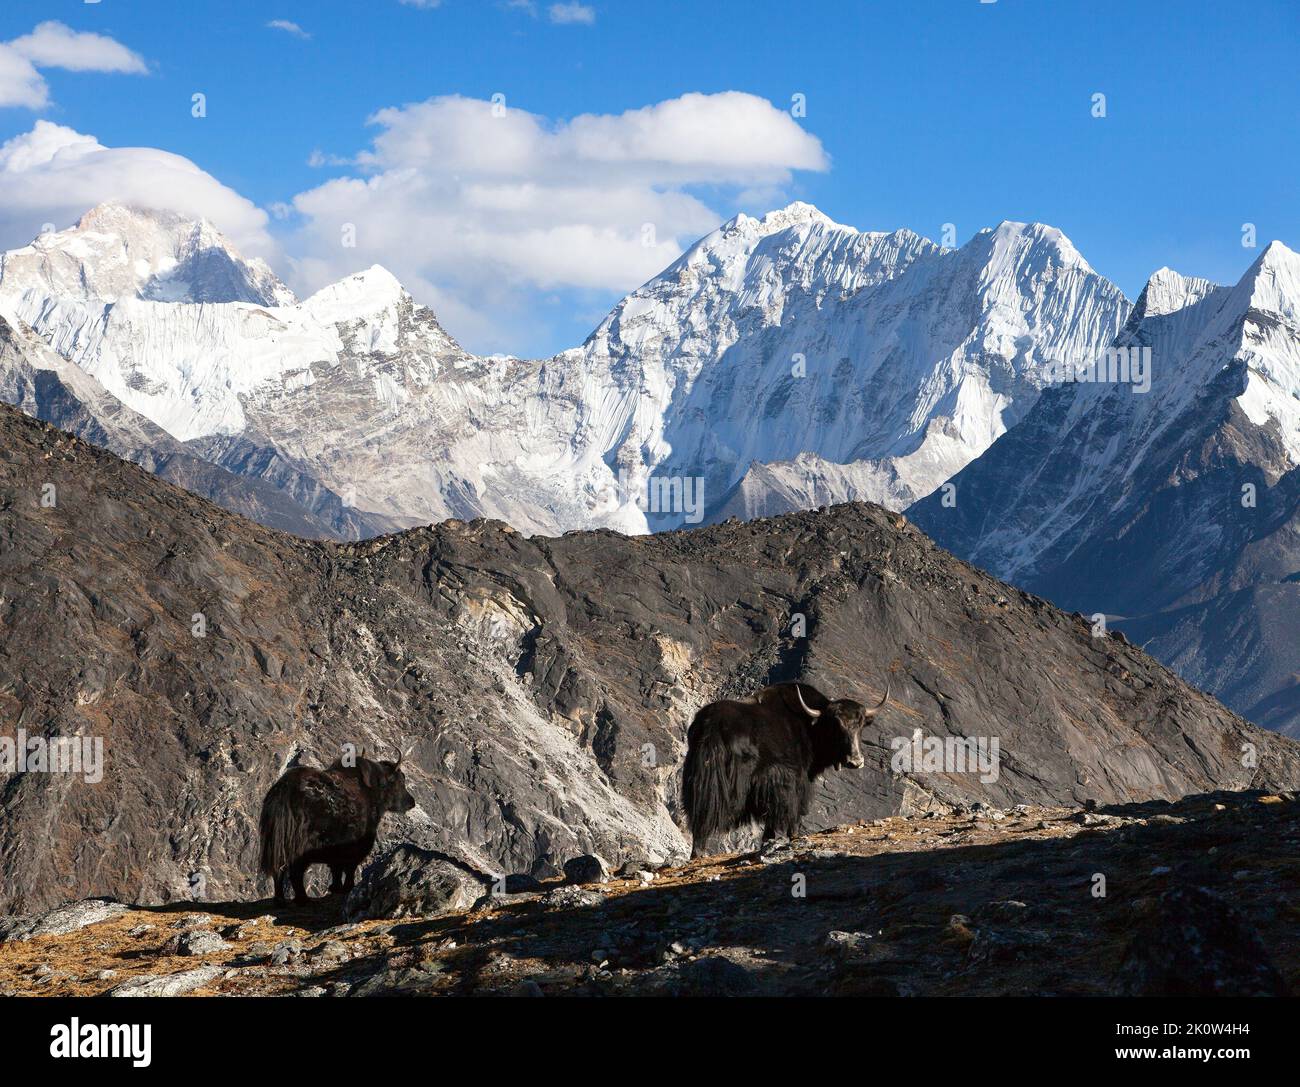 yak, group of two yaks on the way to Everest base camp, Nepal Himalayas yak is farm an d caravan animal in Nepal and Tibet Stock Photo